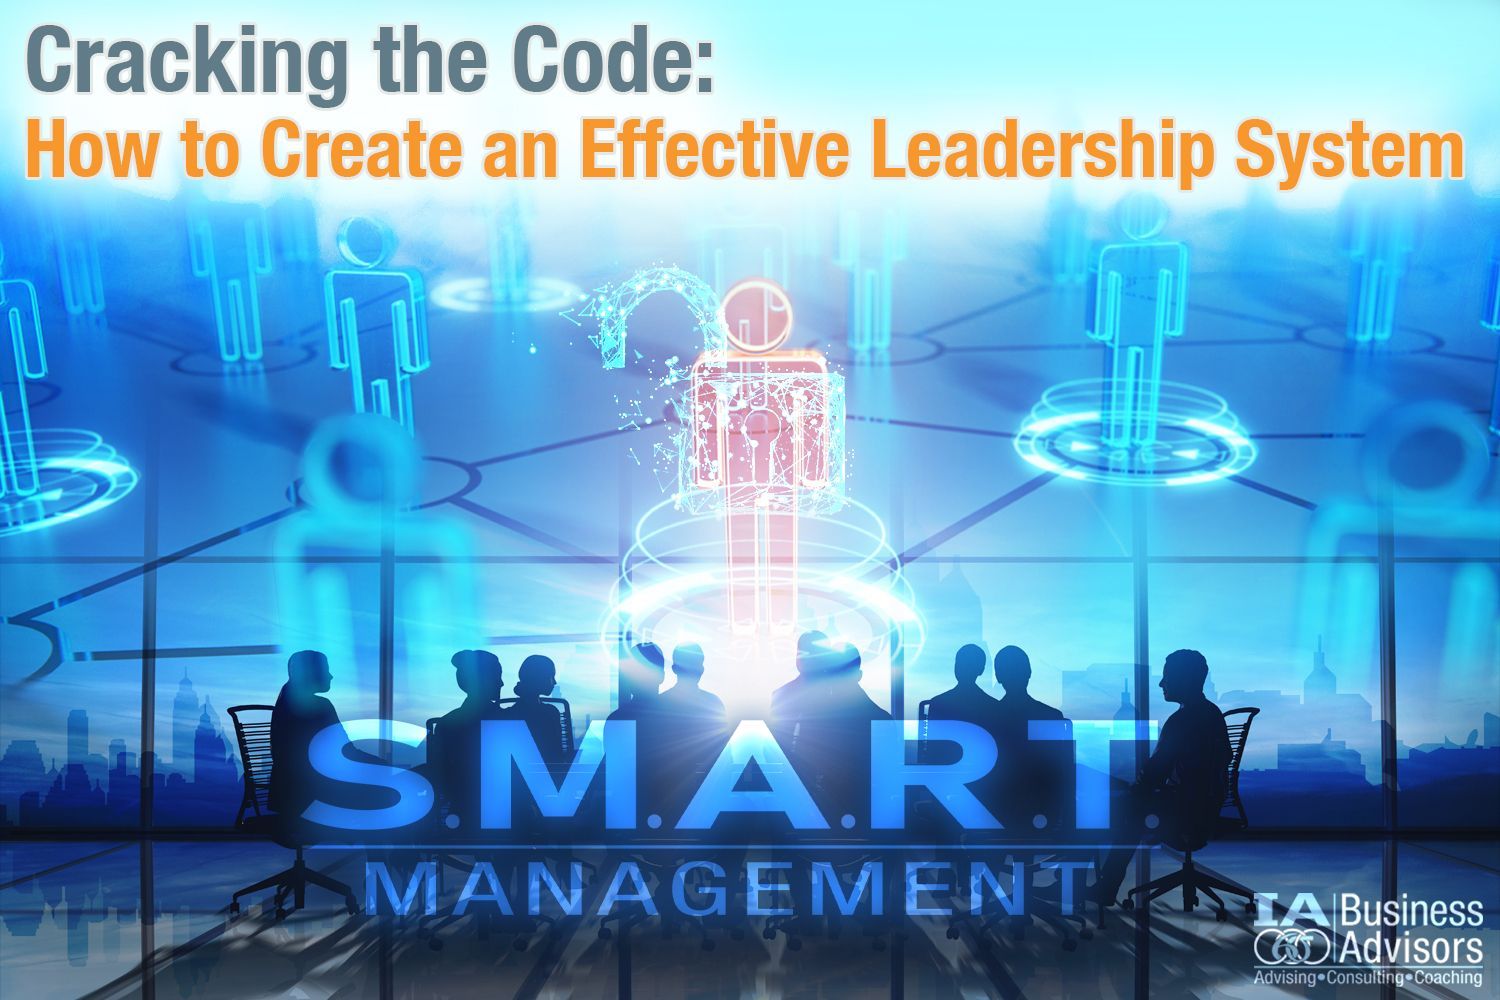 Cracking the Code: How to Build an Effective Leadership System